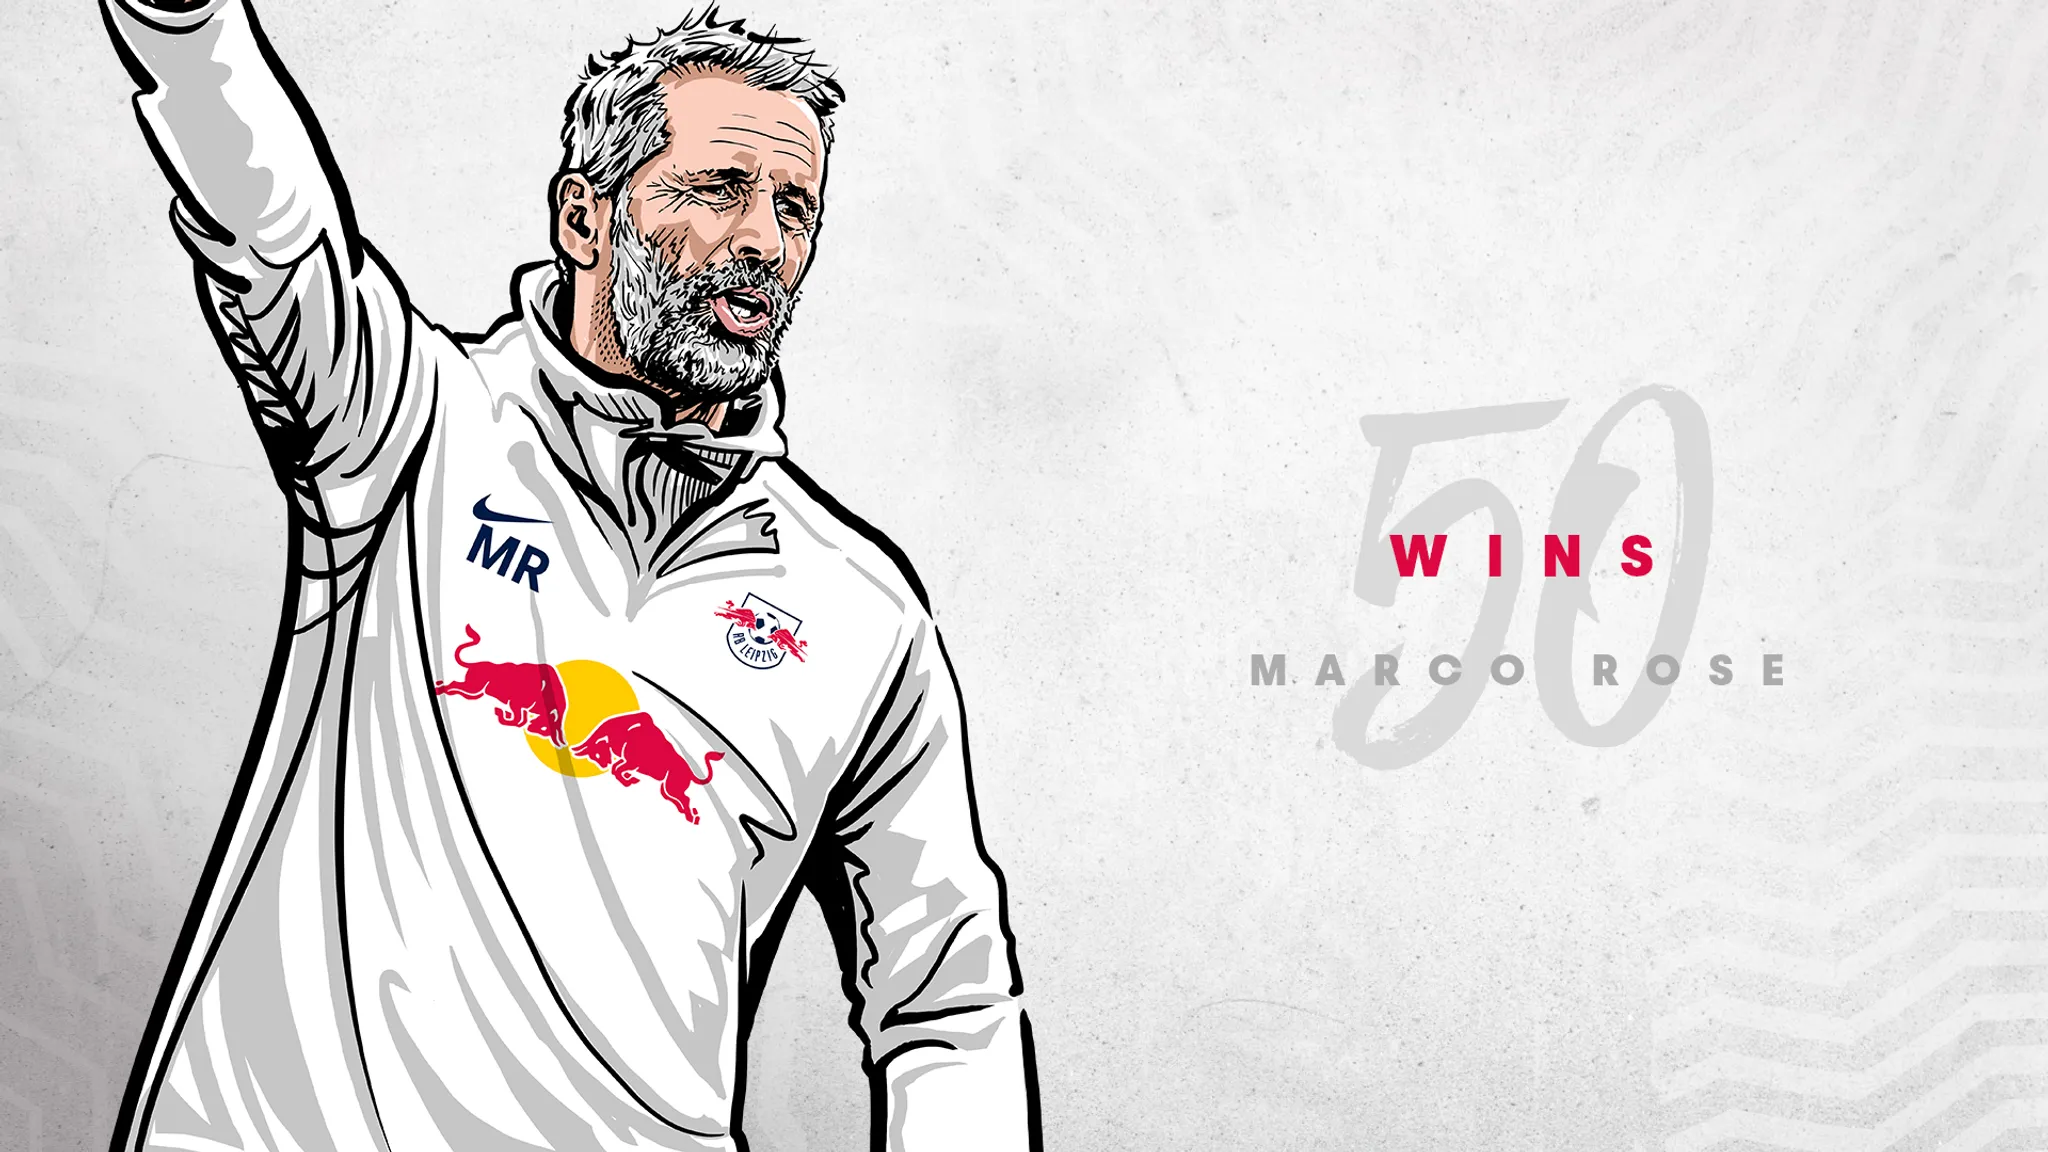 Marco Rose celebrated his 50th competitive win as head coach of RB Leipzig.